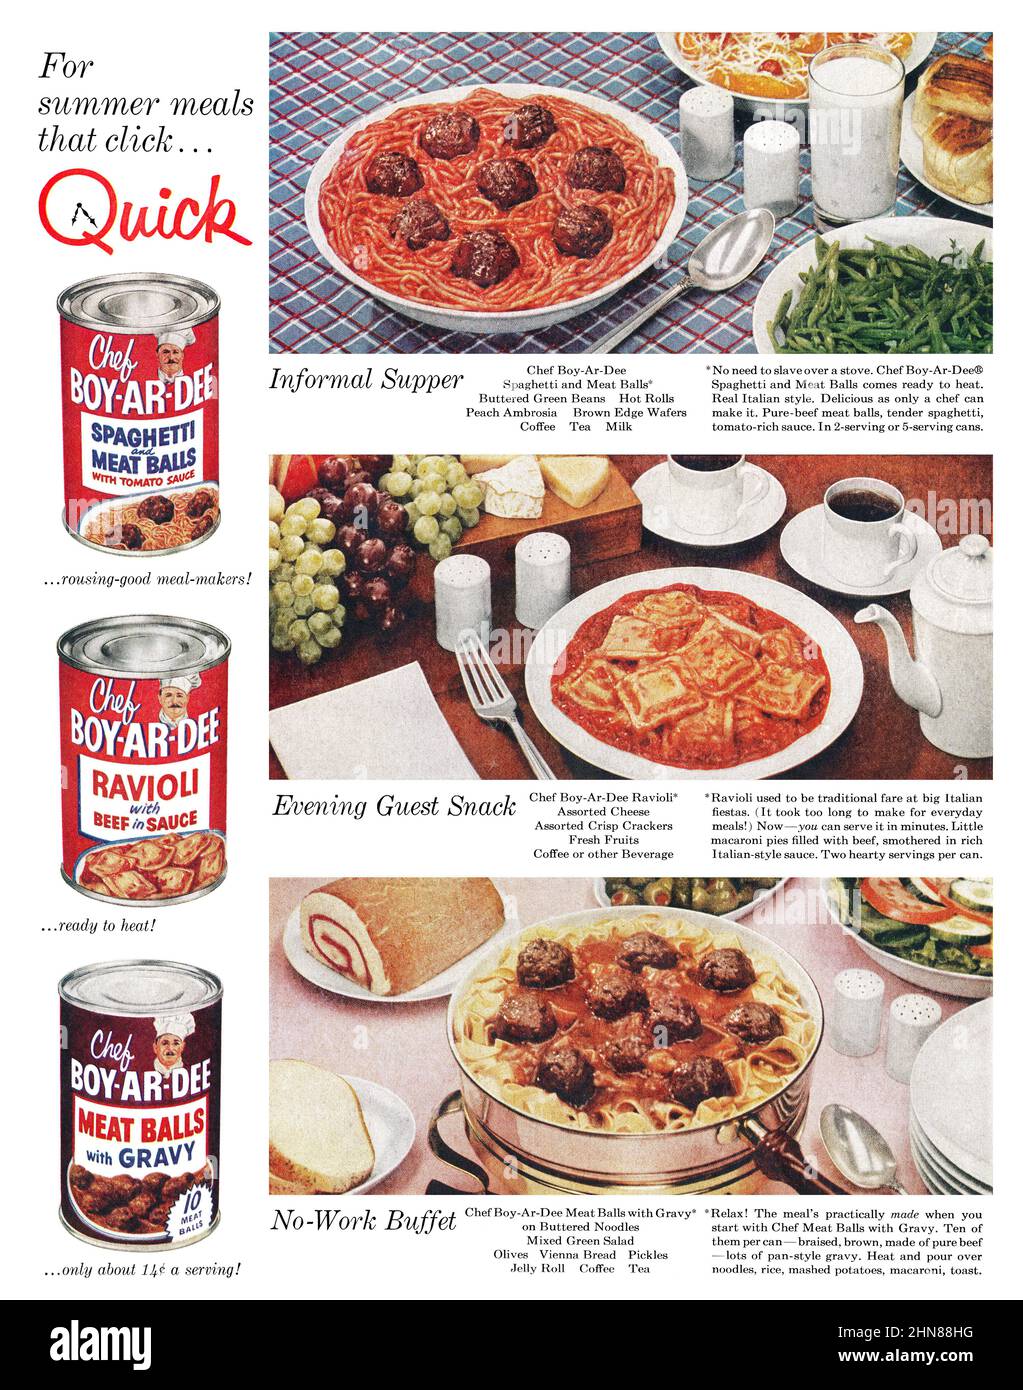 1955 U.S. advertisement for Chef Boy-Ar-Dee canned foods. Stock Photo